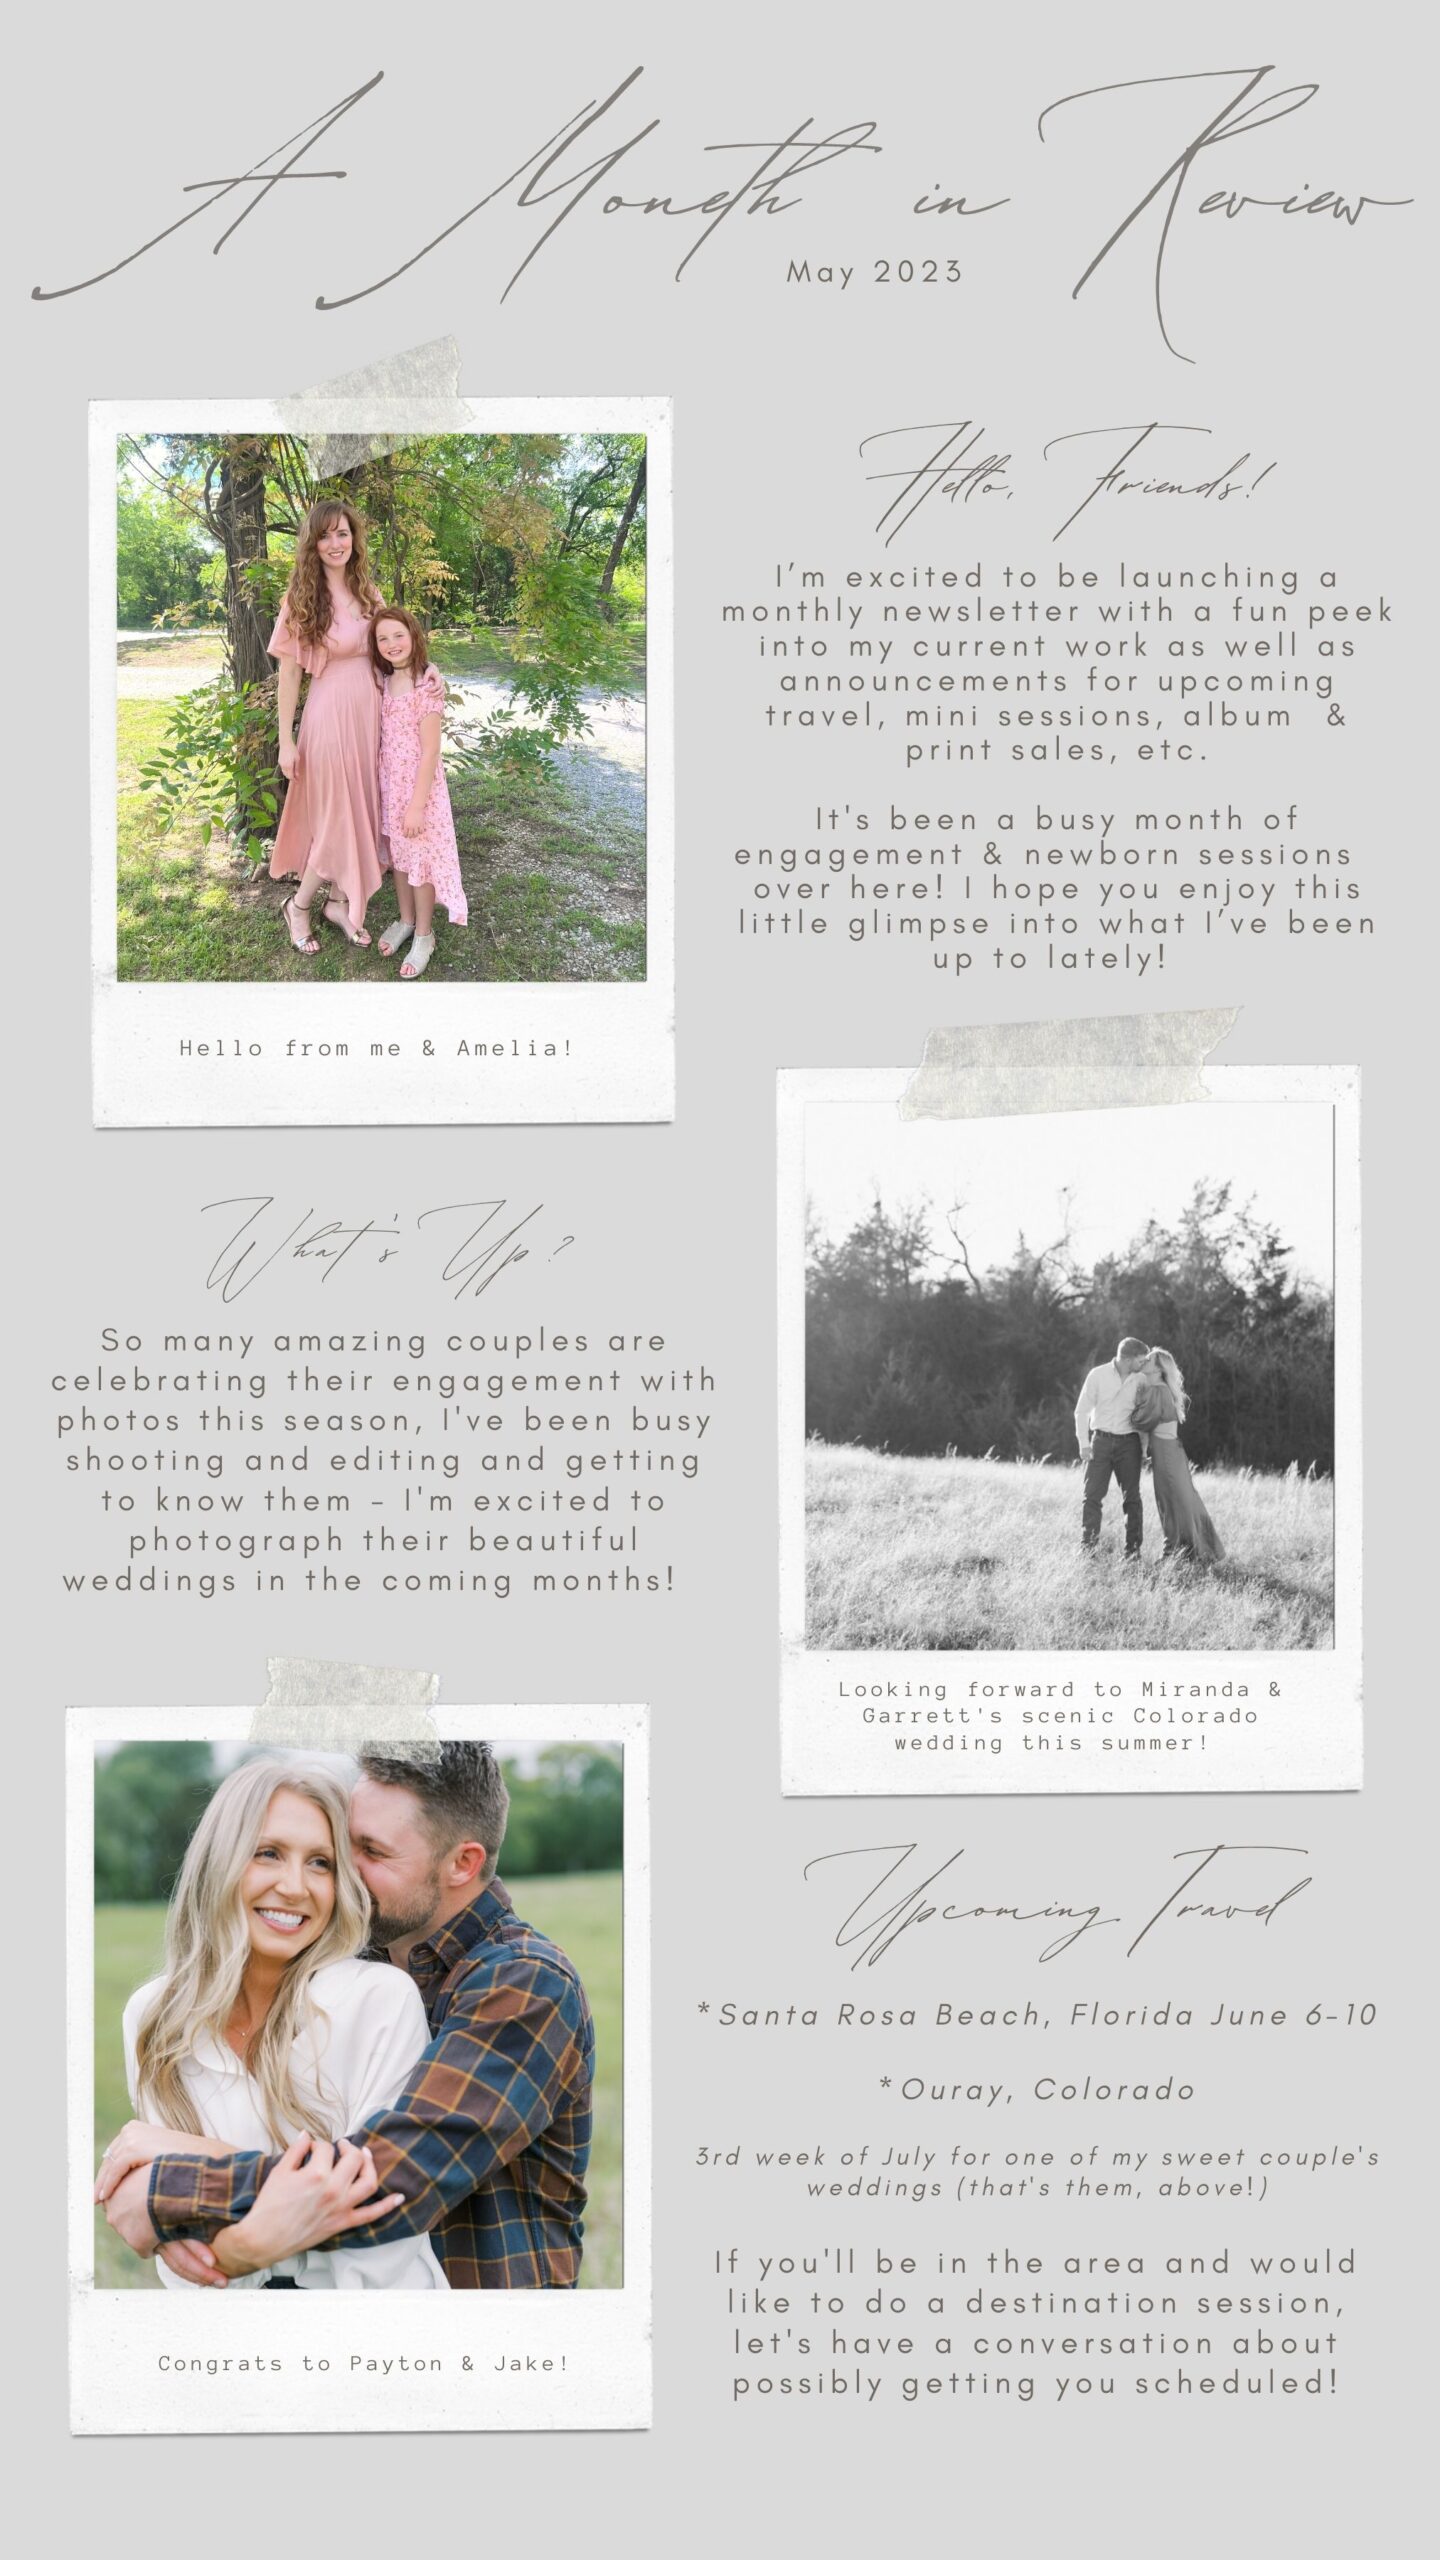 Hello friends! I'm excited to be launching a monthly newsletter with a fun peek into my current work as well as announcements for upcoming travel, mini sessions, album & prin sales, etc. It's been a busy month of engagement & newborn sessions over here! I hope you enjoy this little glimpse into what I've been up to lately. So many amazing couples are celebrating their engagement with photos this season. I've been busy shooting and editing and getting to know them - I'm excited to photograph their beautiful weddings in the coming months! Upcoming Travel: Santa Rosa Beach, Florida June 6-10, 2023 & Ouray, Colorado July 2023. If you'll be in the area and would like to do a destination session, let's have a conversation about possibly getting you scheduled!